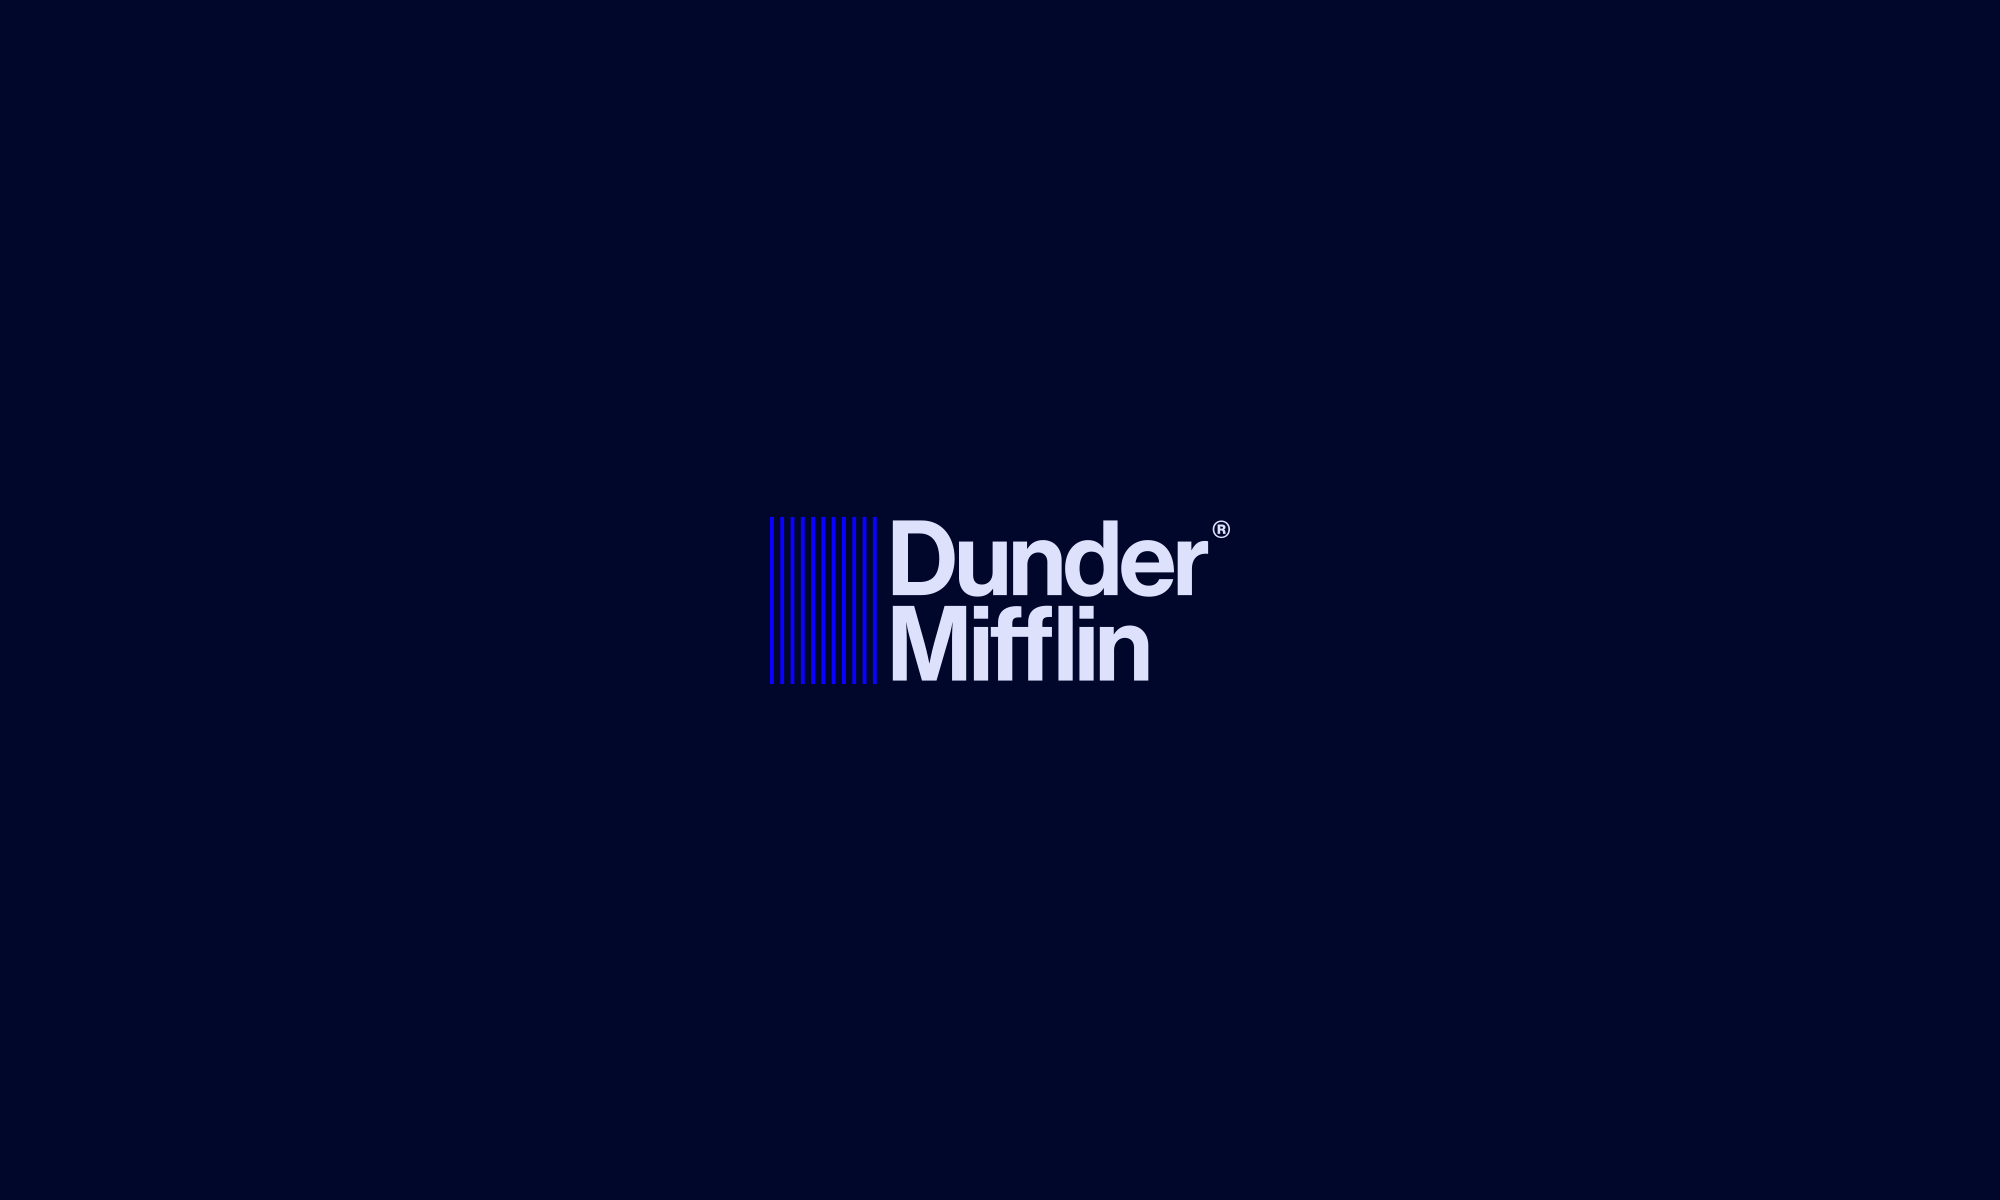 Dunder Mifflin Projects  Photos, videos, logos, illustrations and branding  on Behance